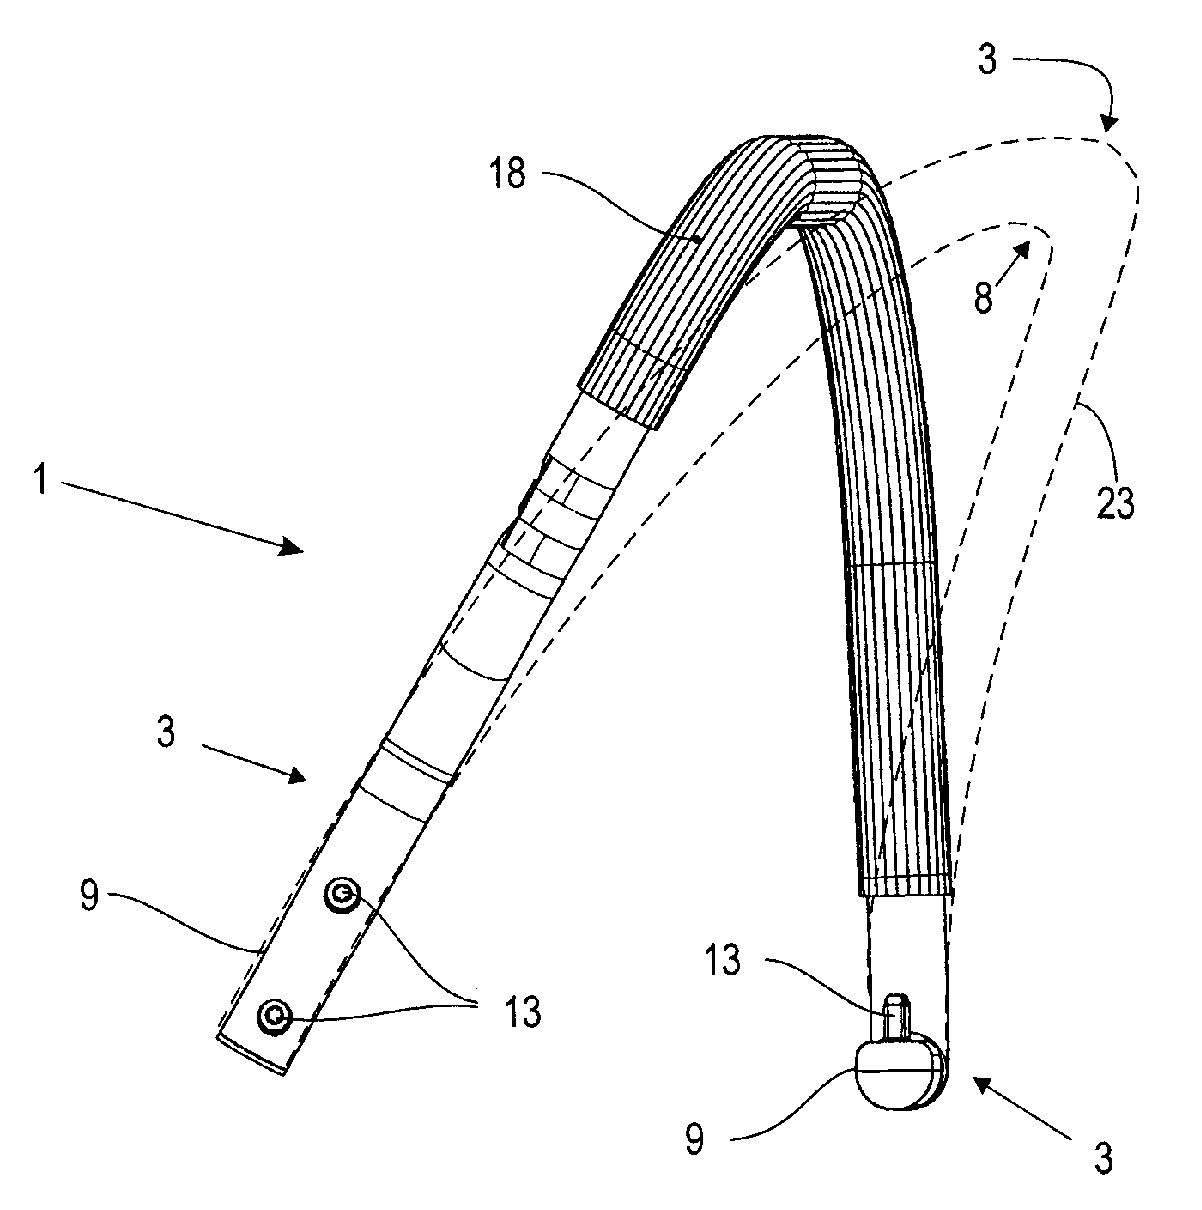 Handle for a Handheld Working Tool